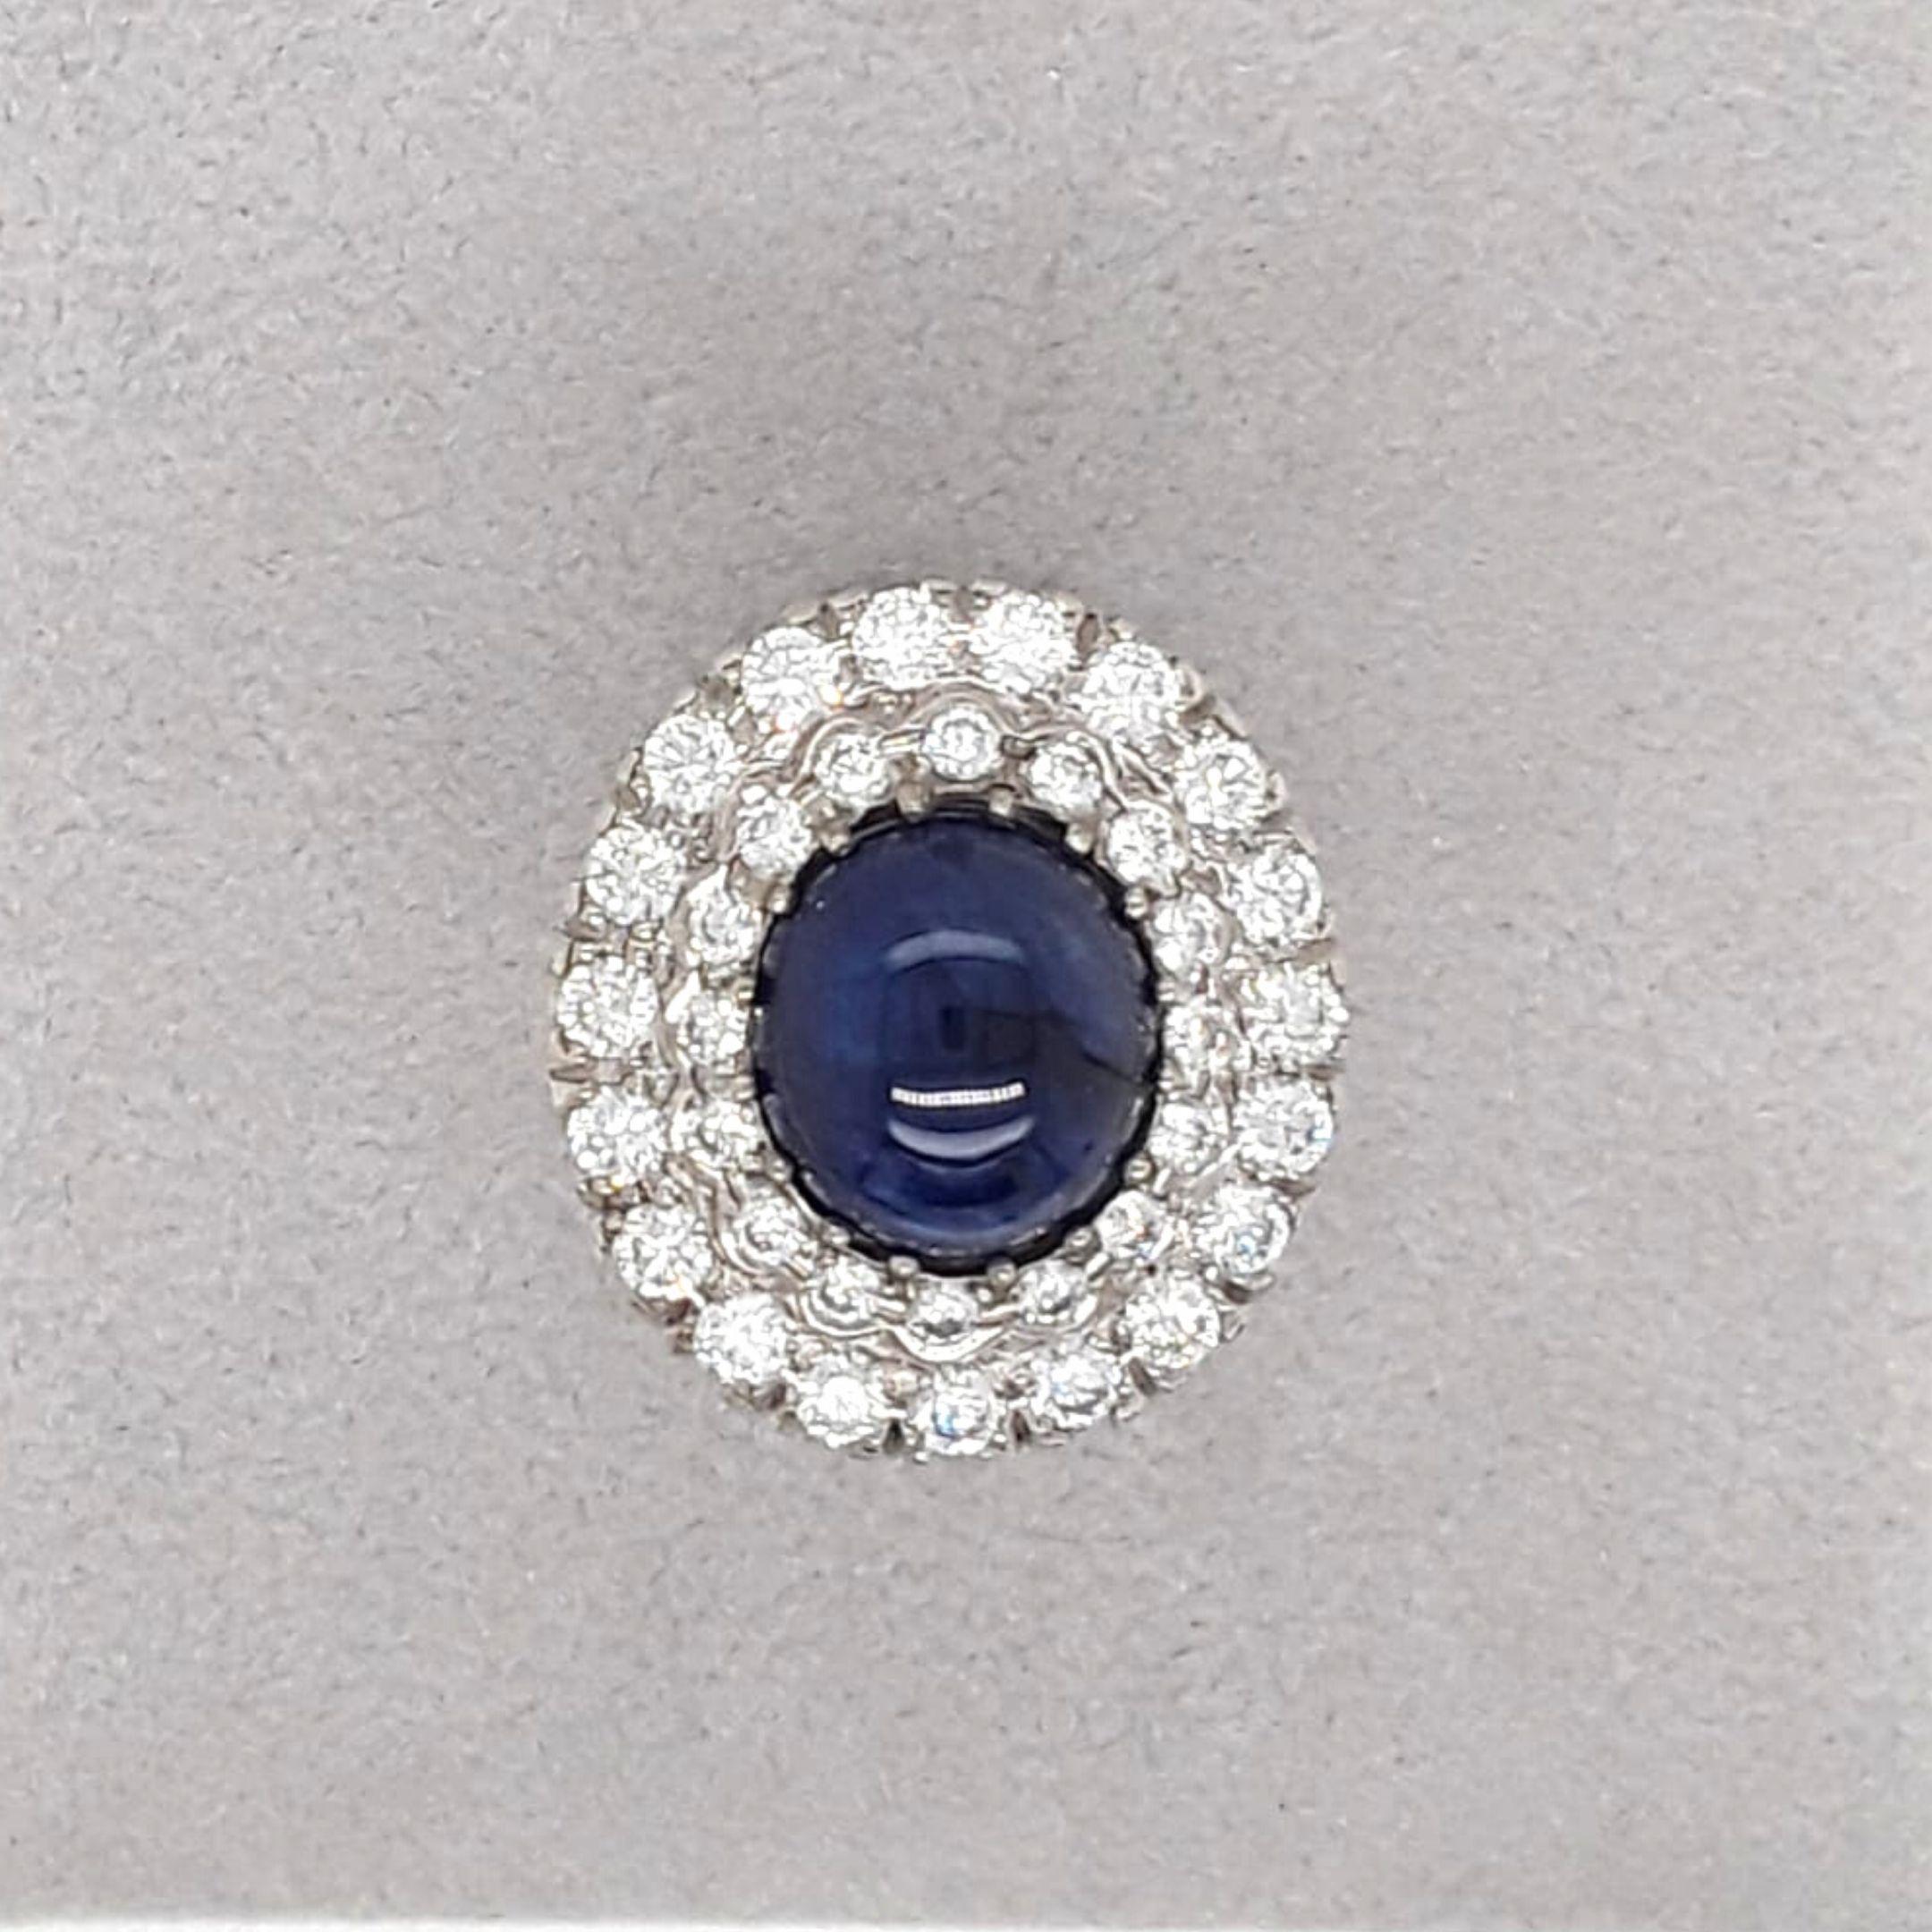 Brilliant Cut Diamond and Cabouchon Sapphire Antique Style Ring